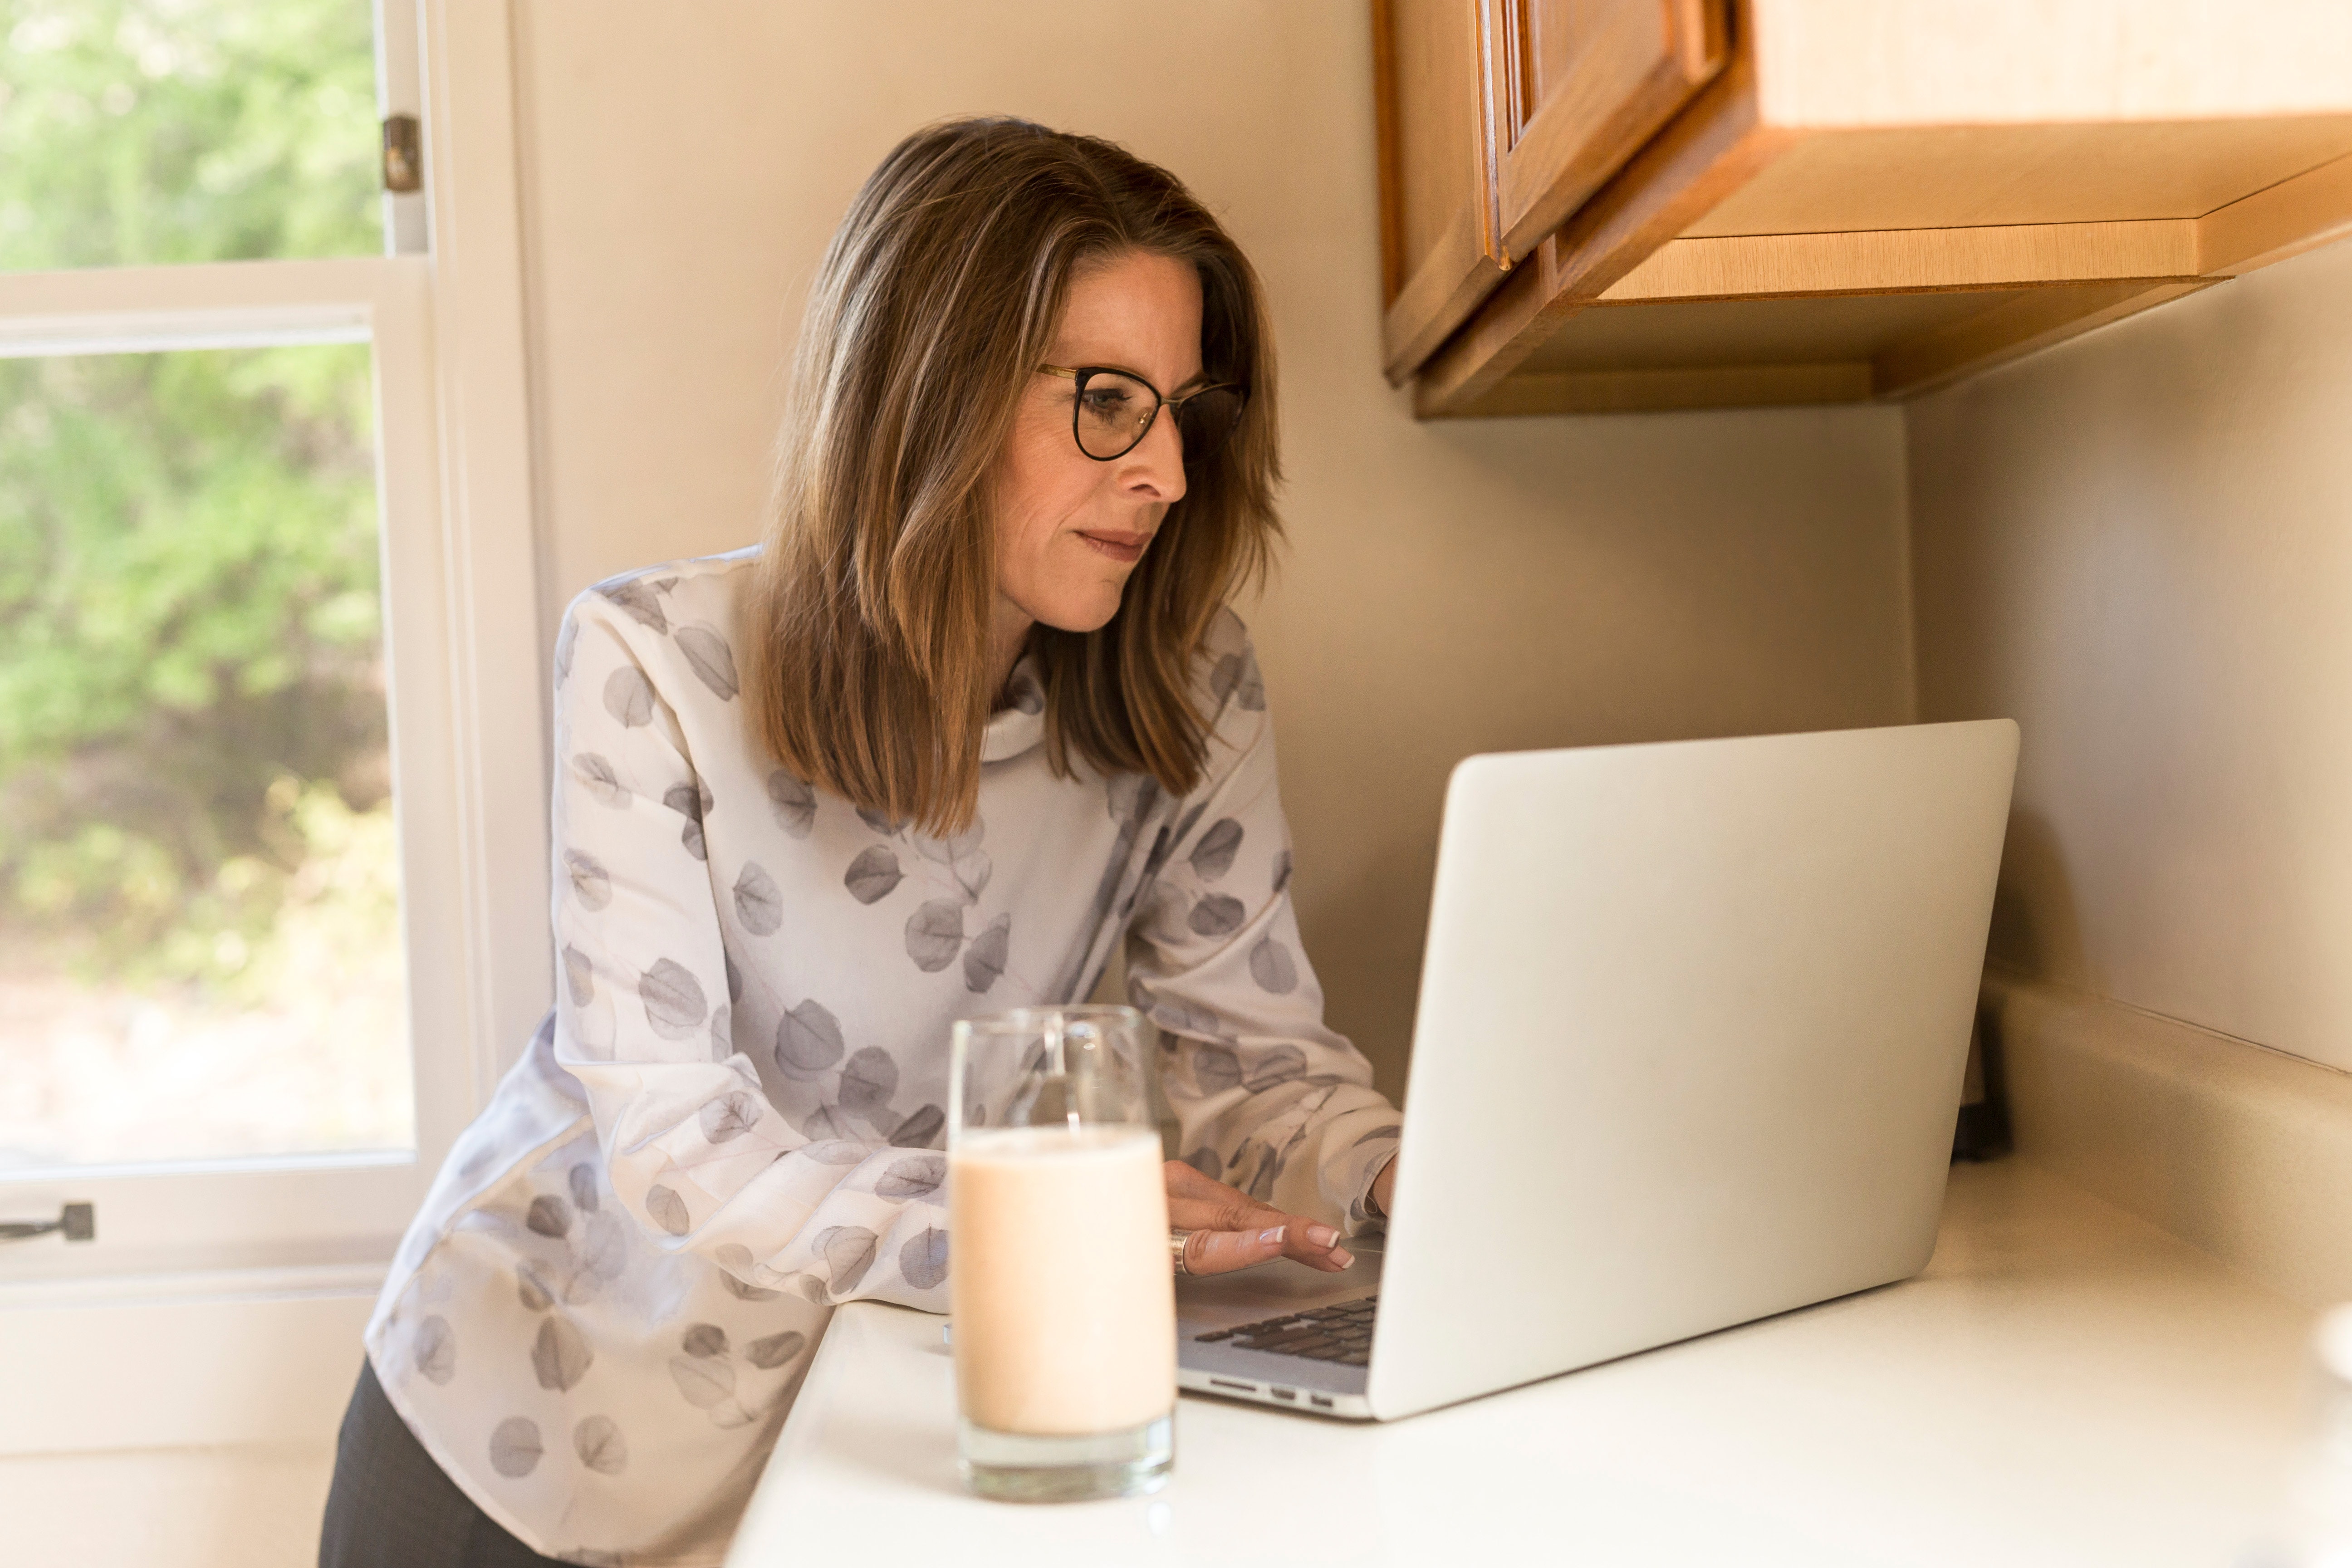 Woman wearing glasses stands at a kitchen counter while using a laptop. There is a glass of milk on the counter.